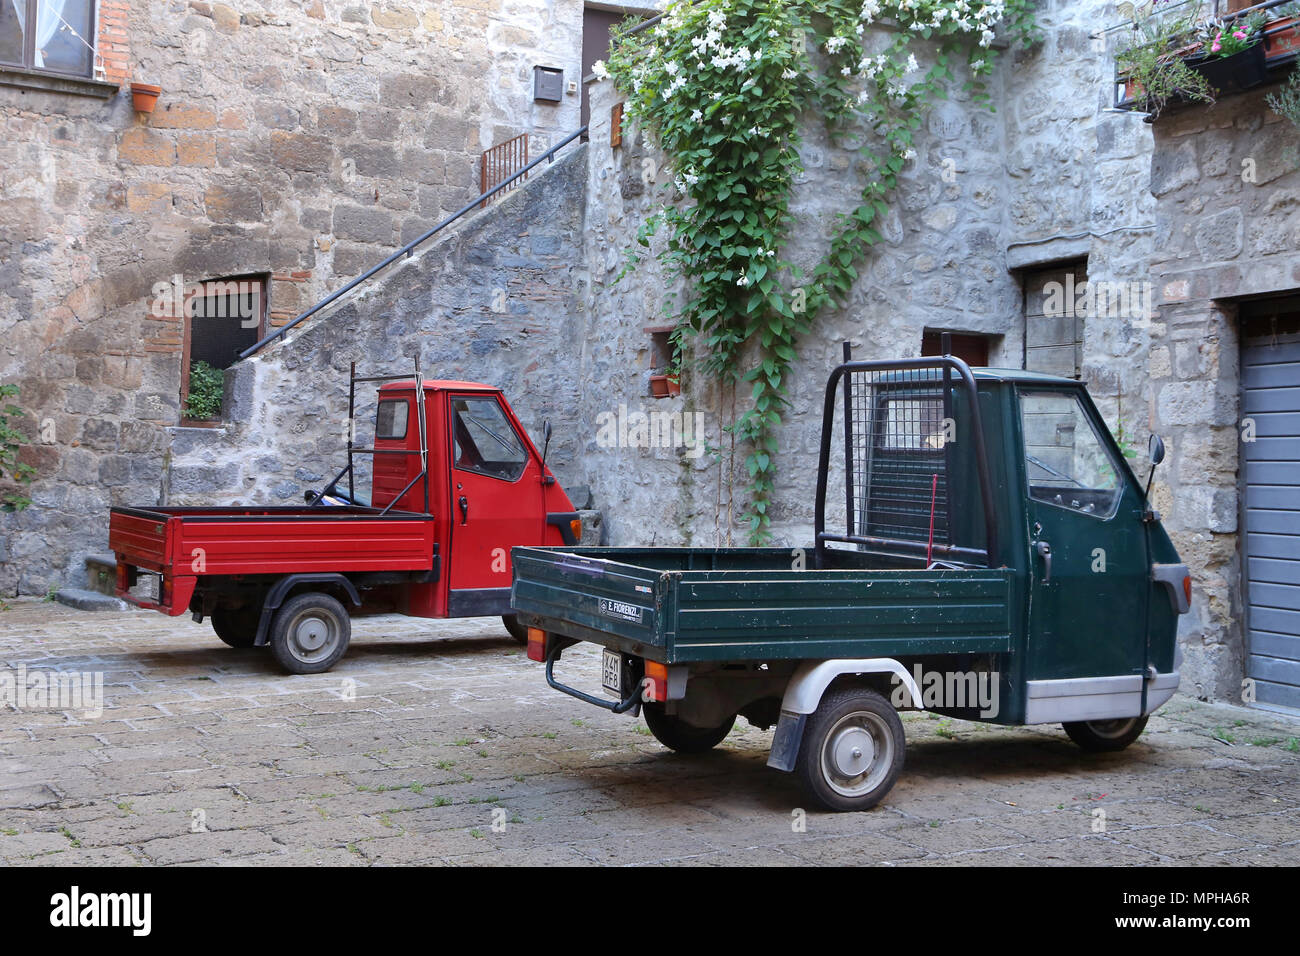 BOLSENA, ITALY - JUNE 28, 2015:picturesque old street with dwellings and an ancient italian vehicle Ape Piaggio in the Bolsena, Lazio. Stock Photo